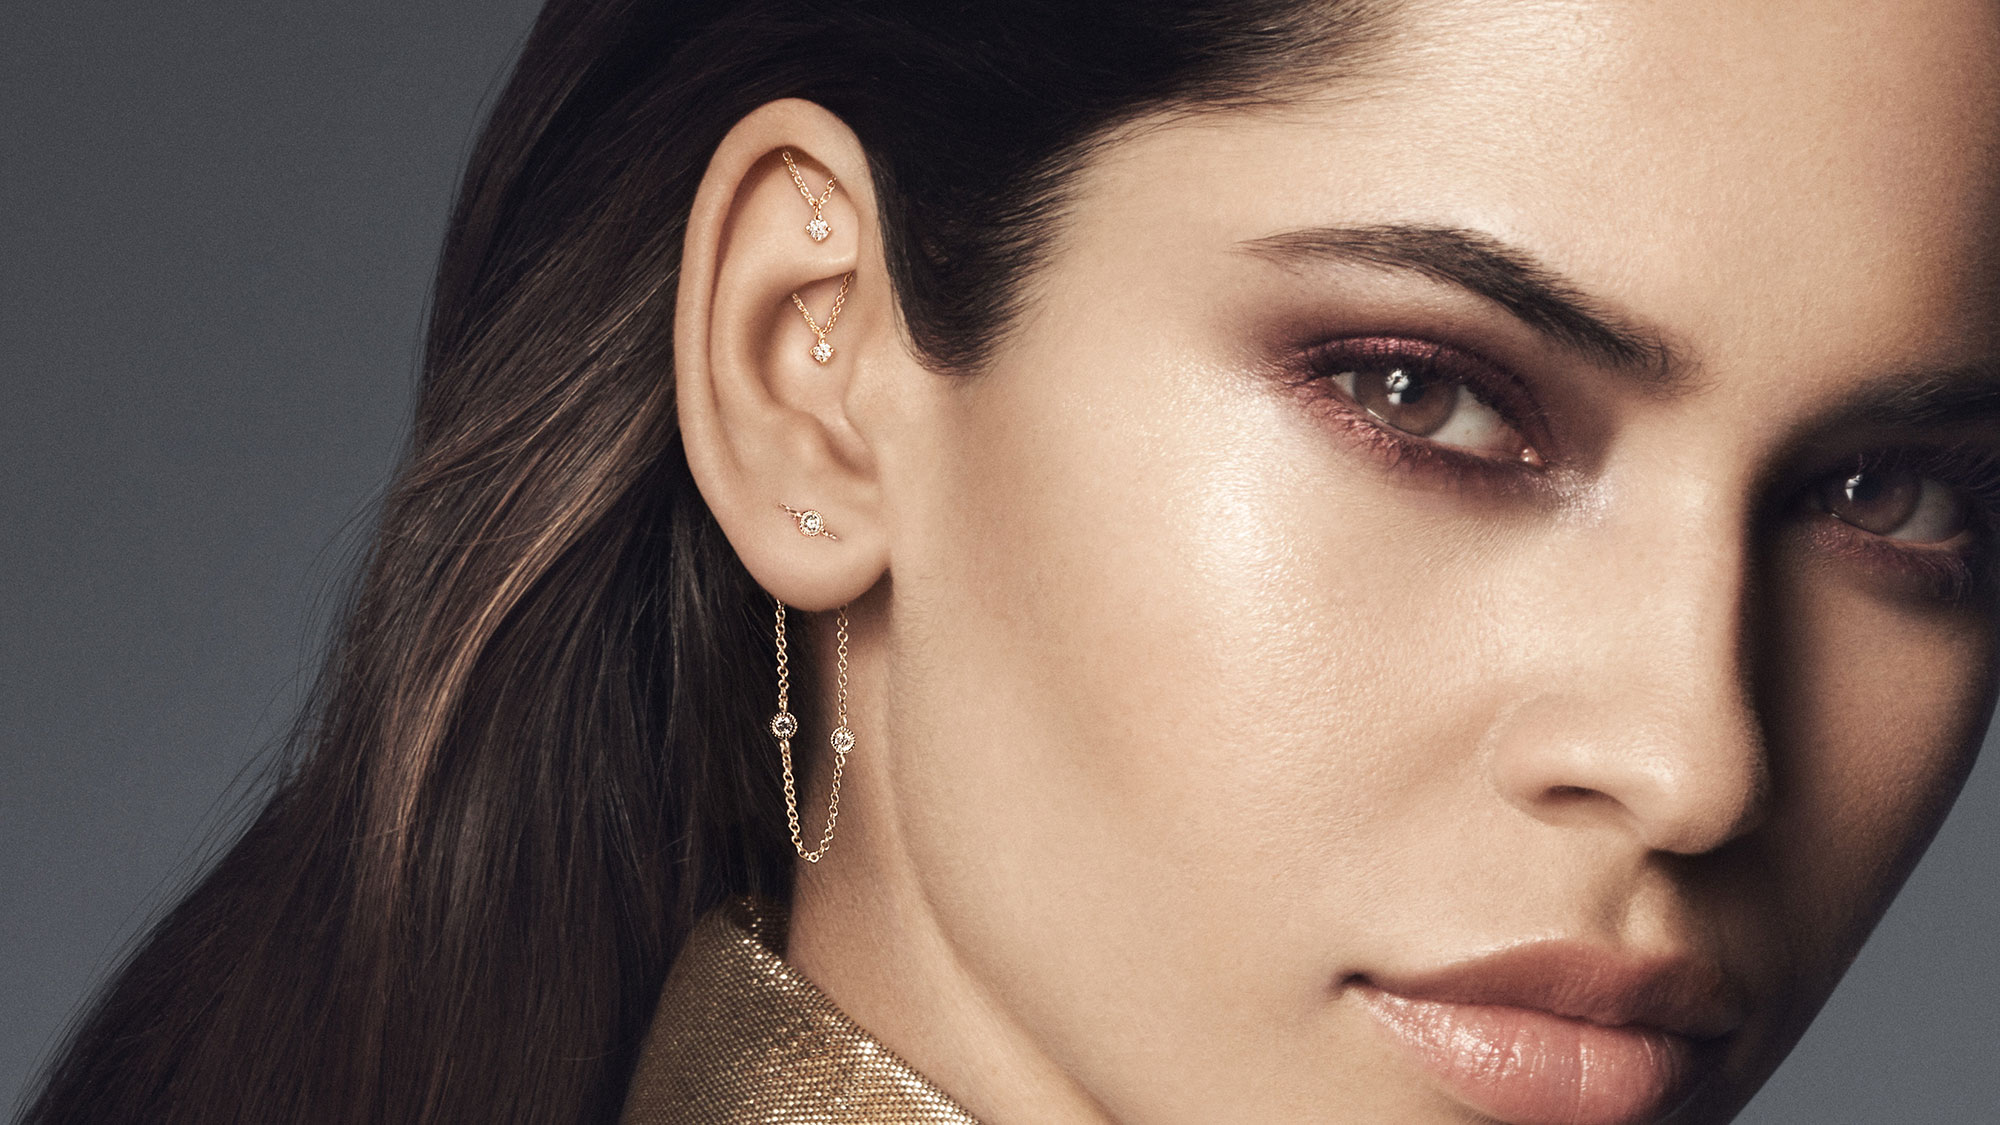 This cult jeweller has created two new piercings and they’re mindblowing